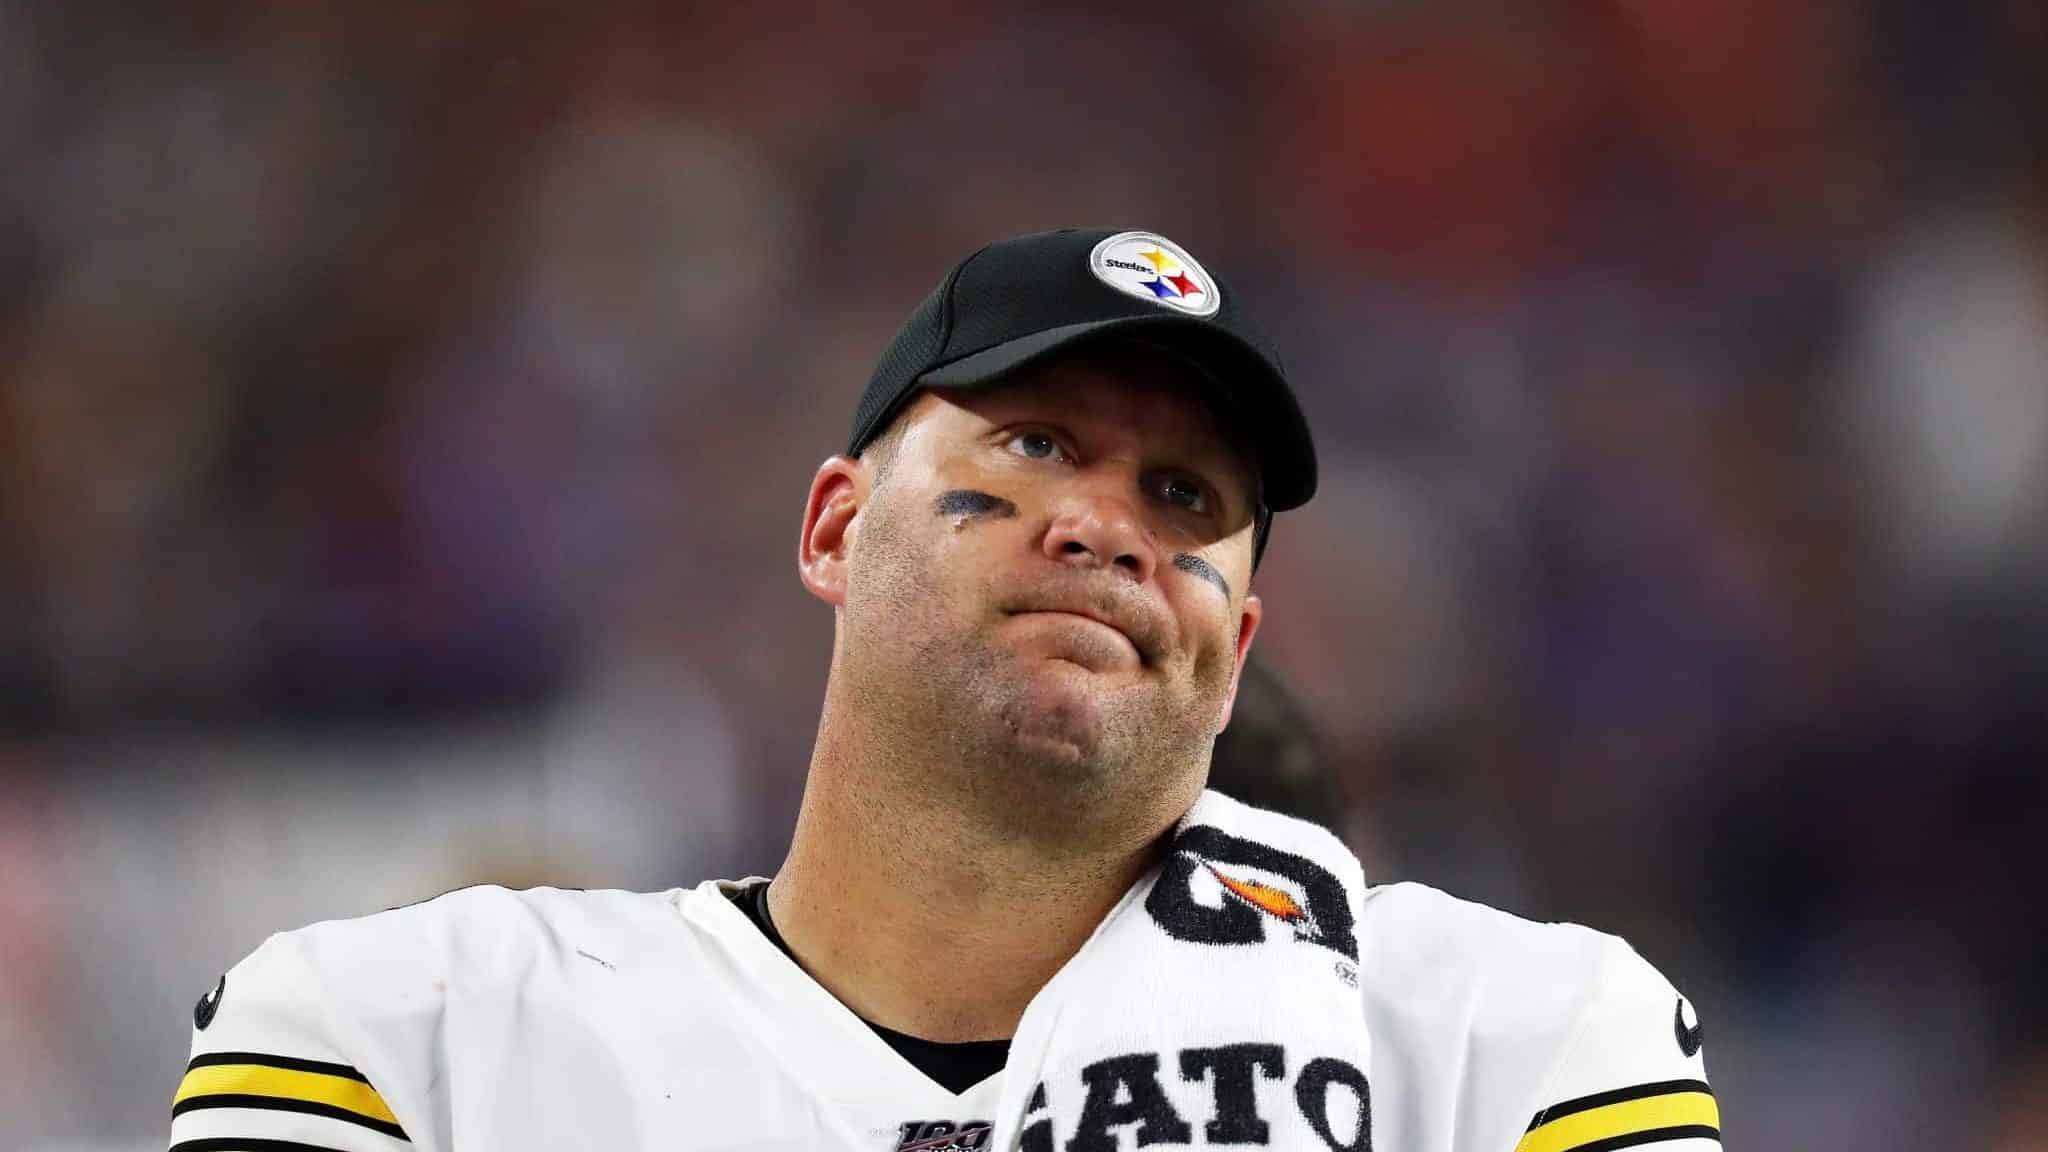 FOXBOROUGH, MASSACHUSETTS - SEPTEMBER 08: Ben Roethlisberger #7 of the Pittsburgh Steelers looks on from the sideline during the game between the New England Patriots and the Pittsburgh Steelers at Gillette Stadium on September 08, 2019 in Foxborough, Massachusetts.